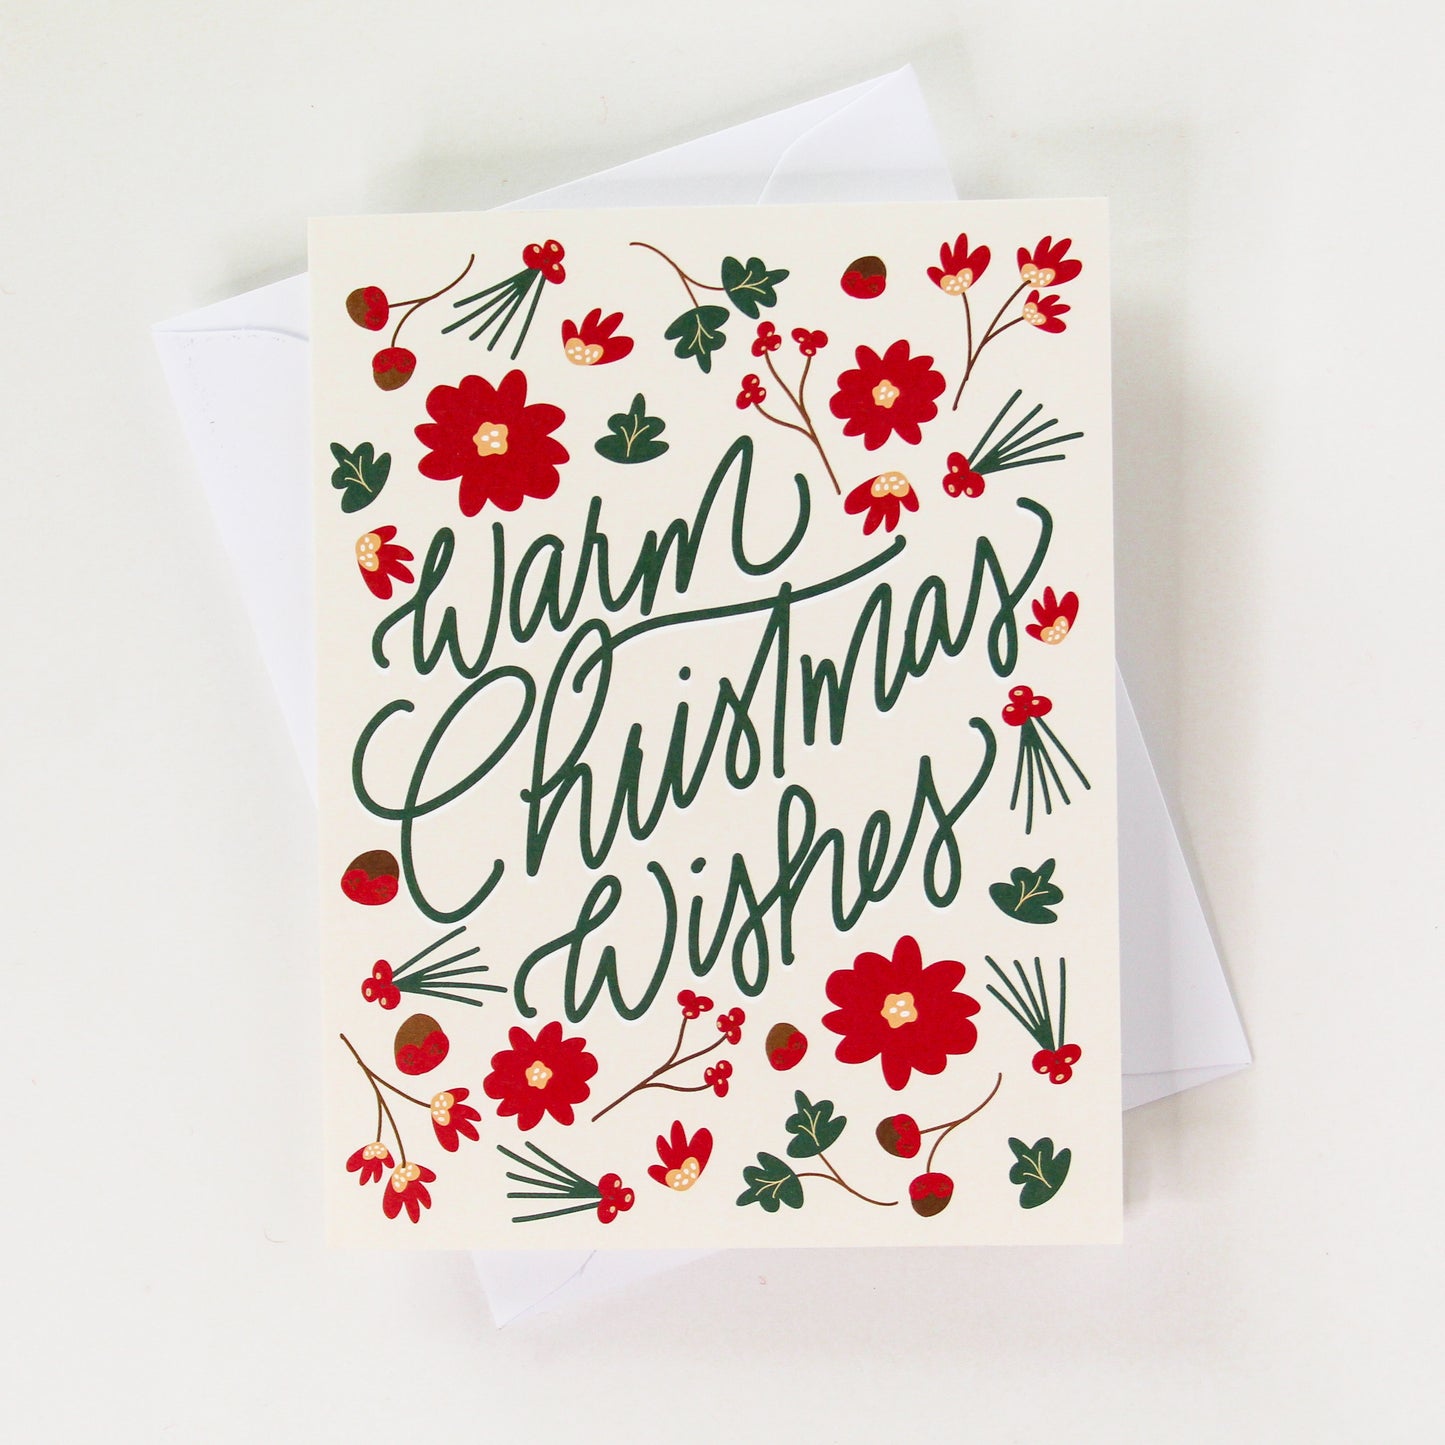 Warm Christmas Wishes Greeting Card